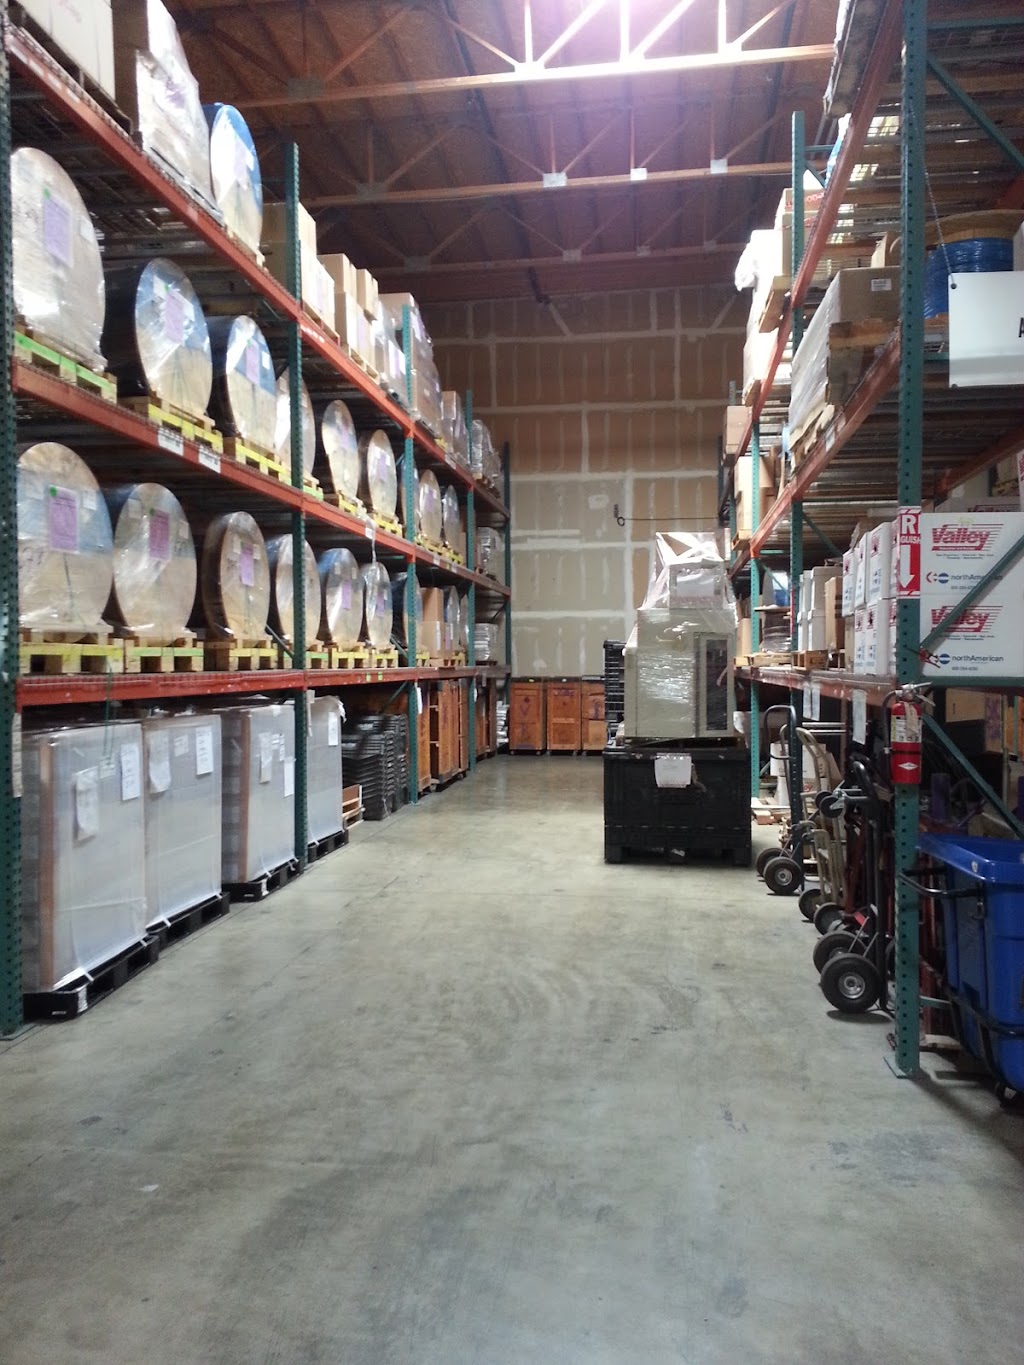 Valley Relocation & Storage | 5000 Marsh Dr, Concord, CA 94520 | Phone: (925) 300-4558